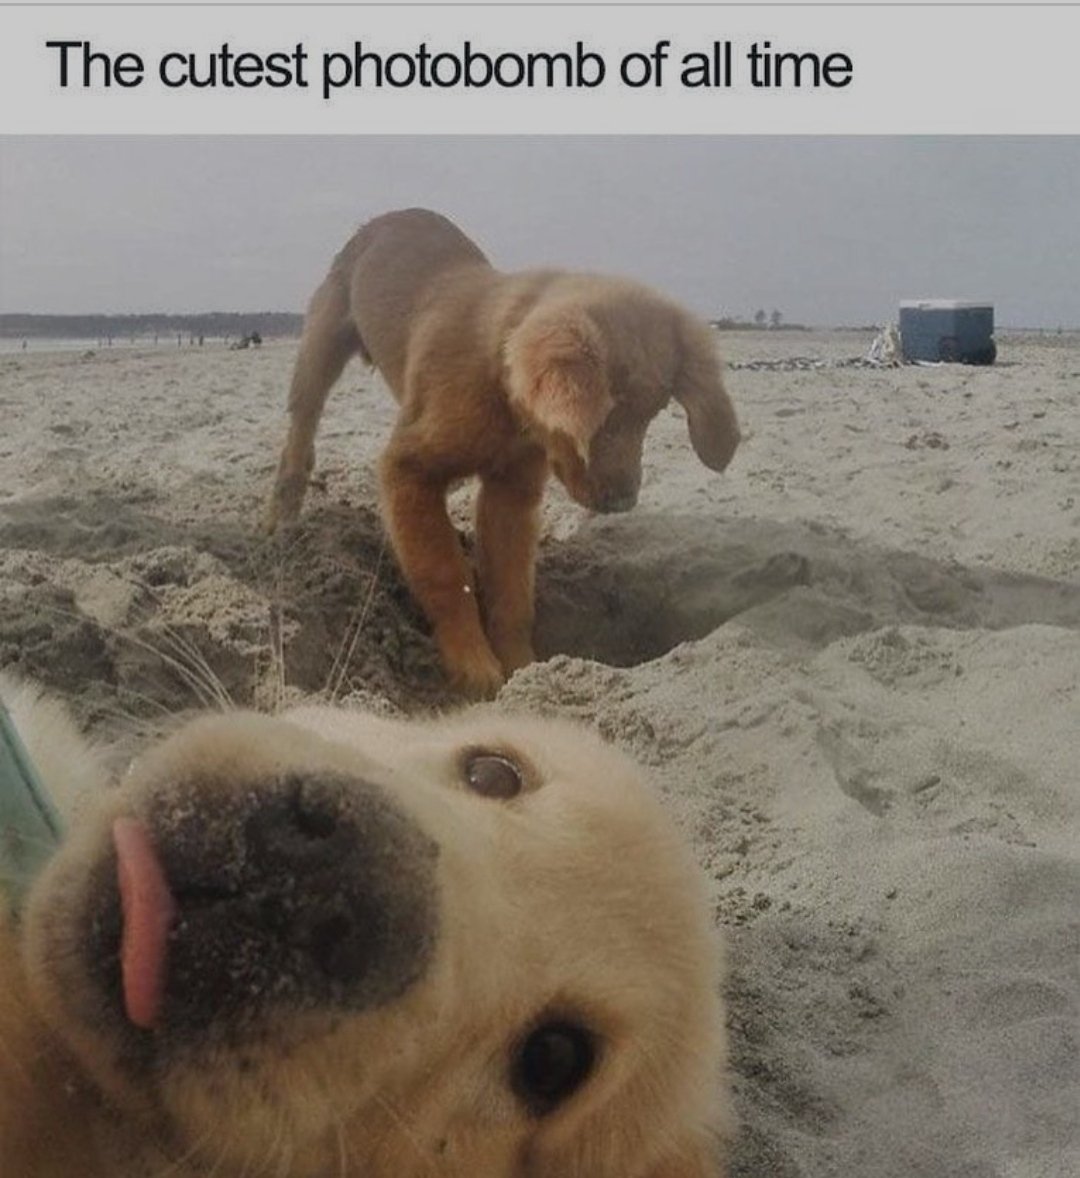 We wouldn't mind getting our photos photobombed this way! Cutest thing ever. Like, share and comment for more such content ❤️

.
.
#Teamsavethepaws #adoption #adoptdontshop #adopt #adoptionjourney #dog #adoptionislove #love #rescue #dogsofinstagram #family #fostercare